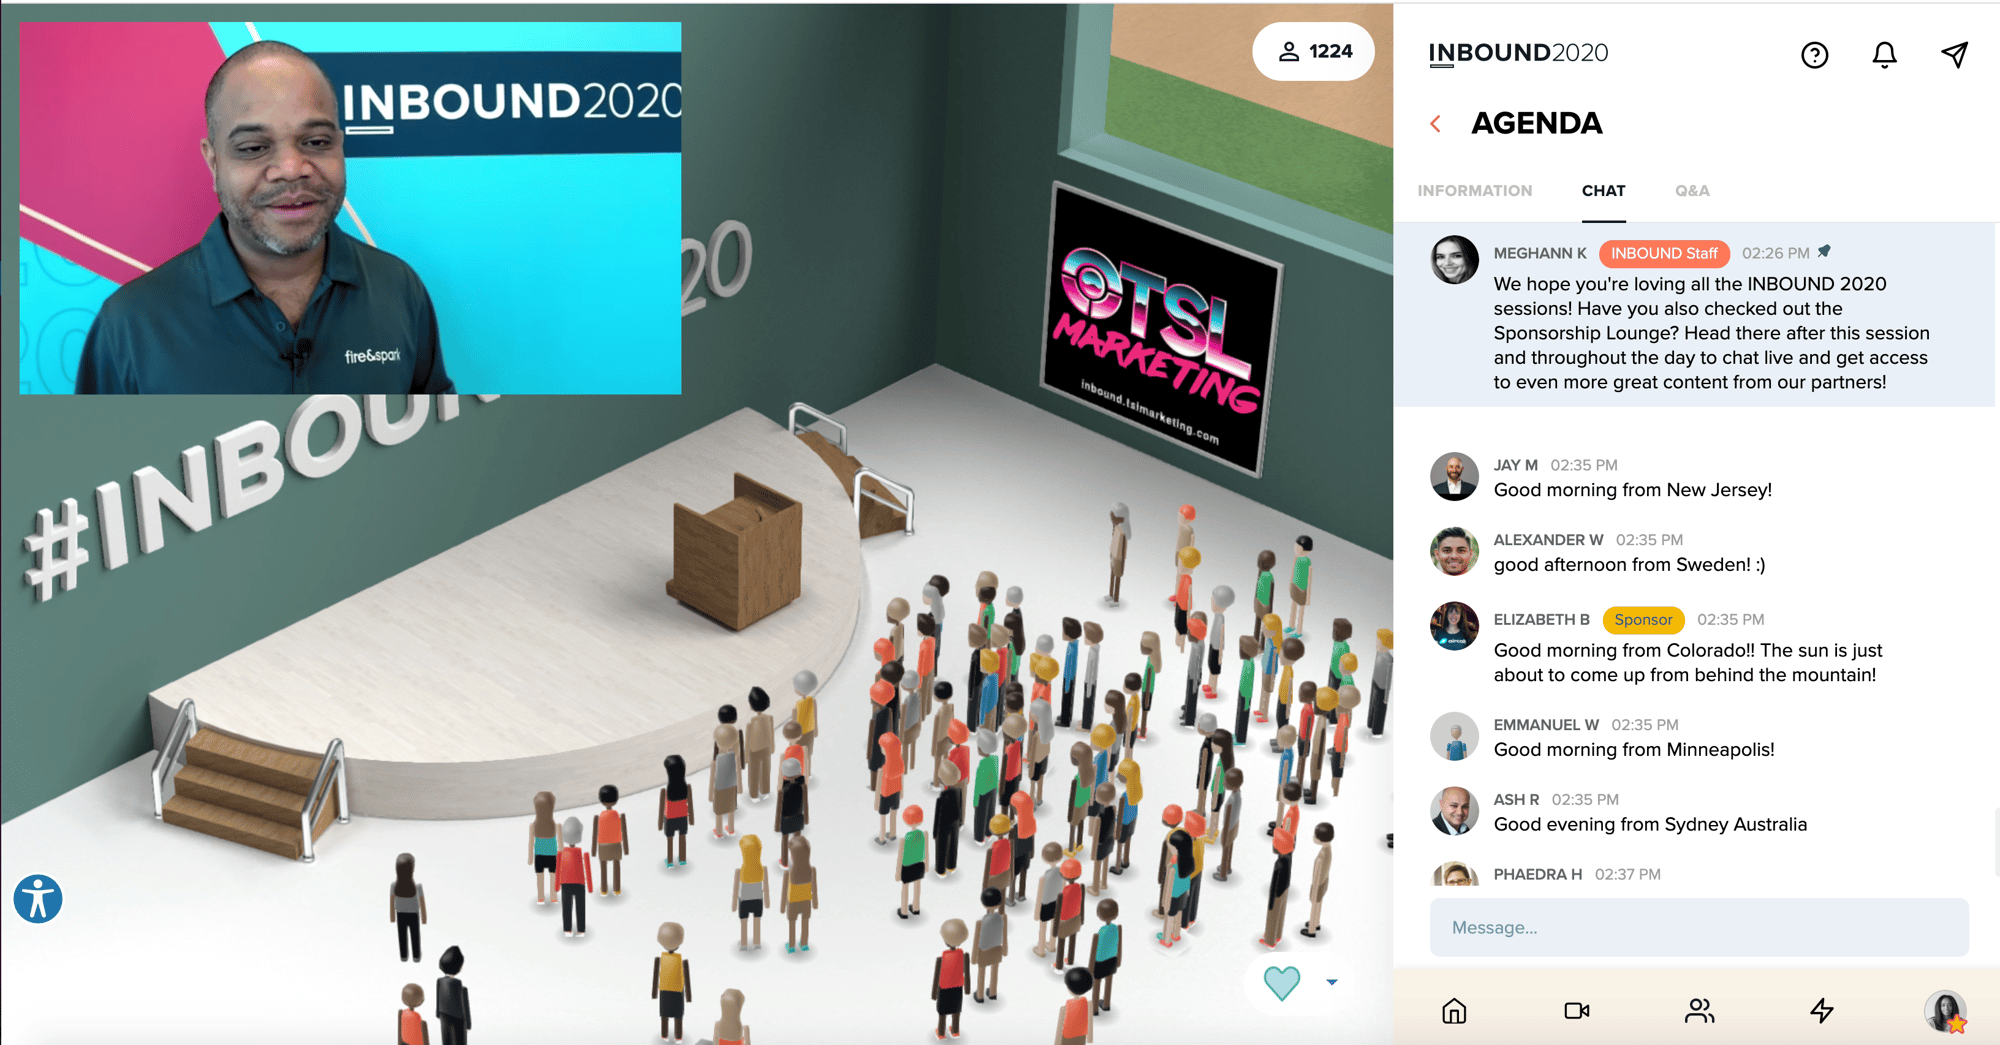 What INBOUND 2020 can teach us about virtual events